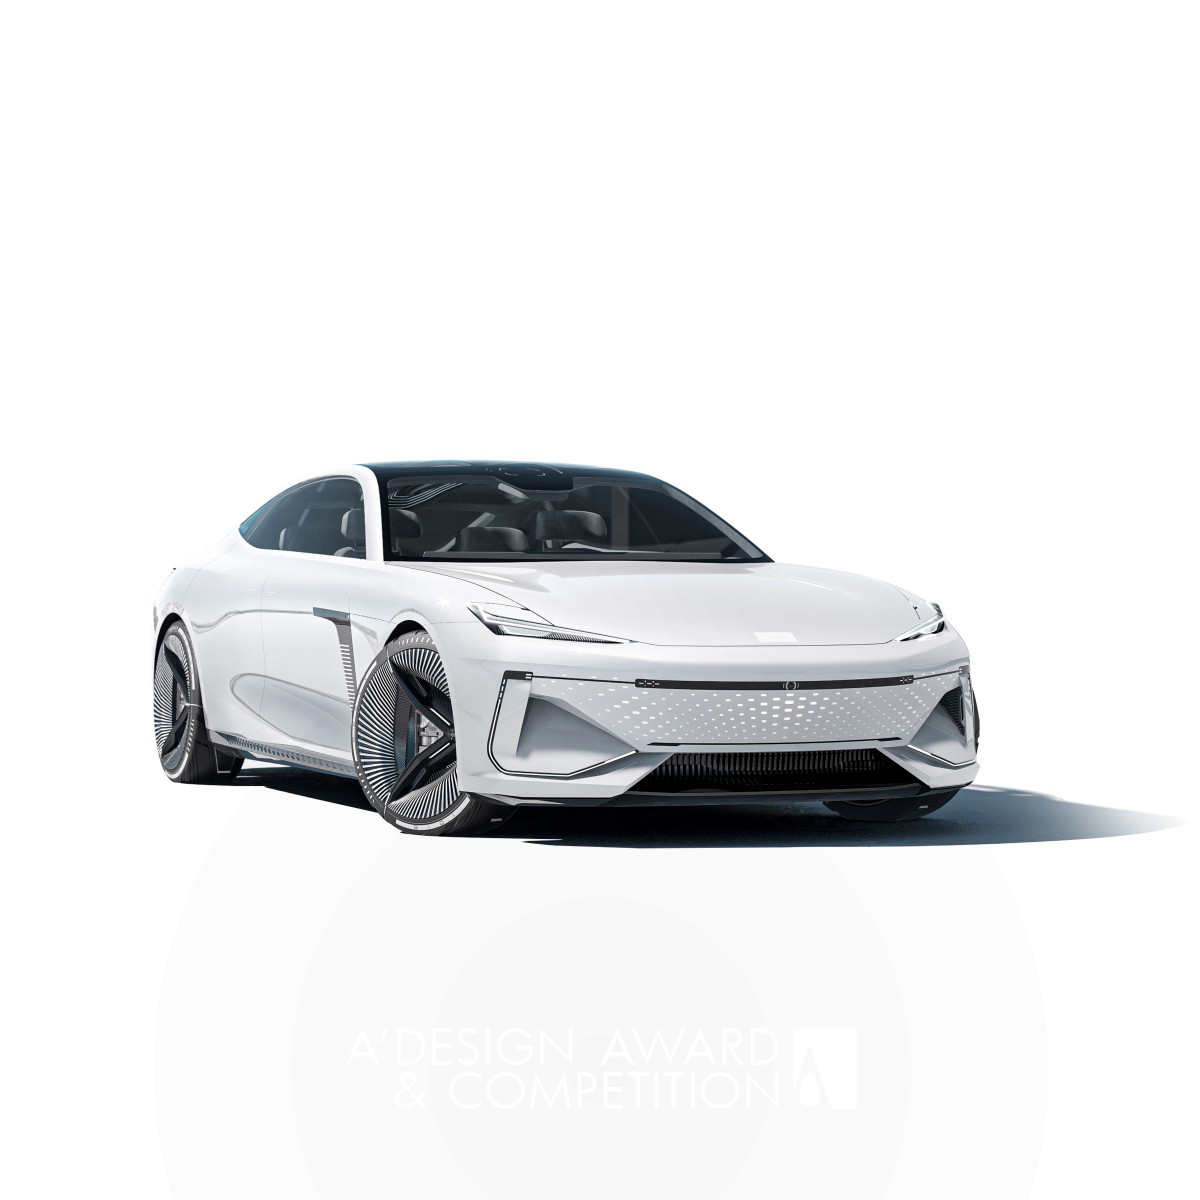 Galaxy Light Concept Car by Geely Design